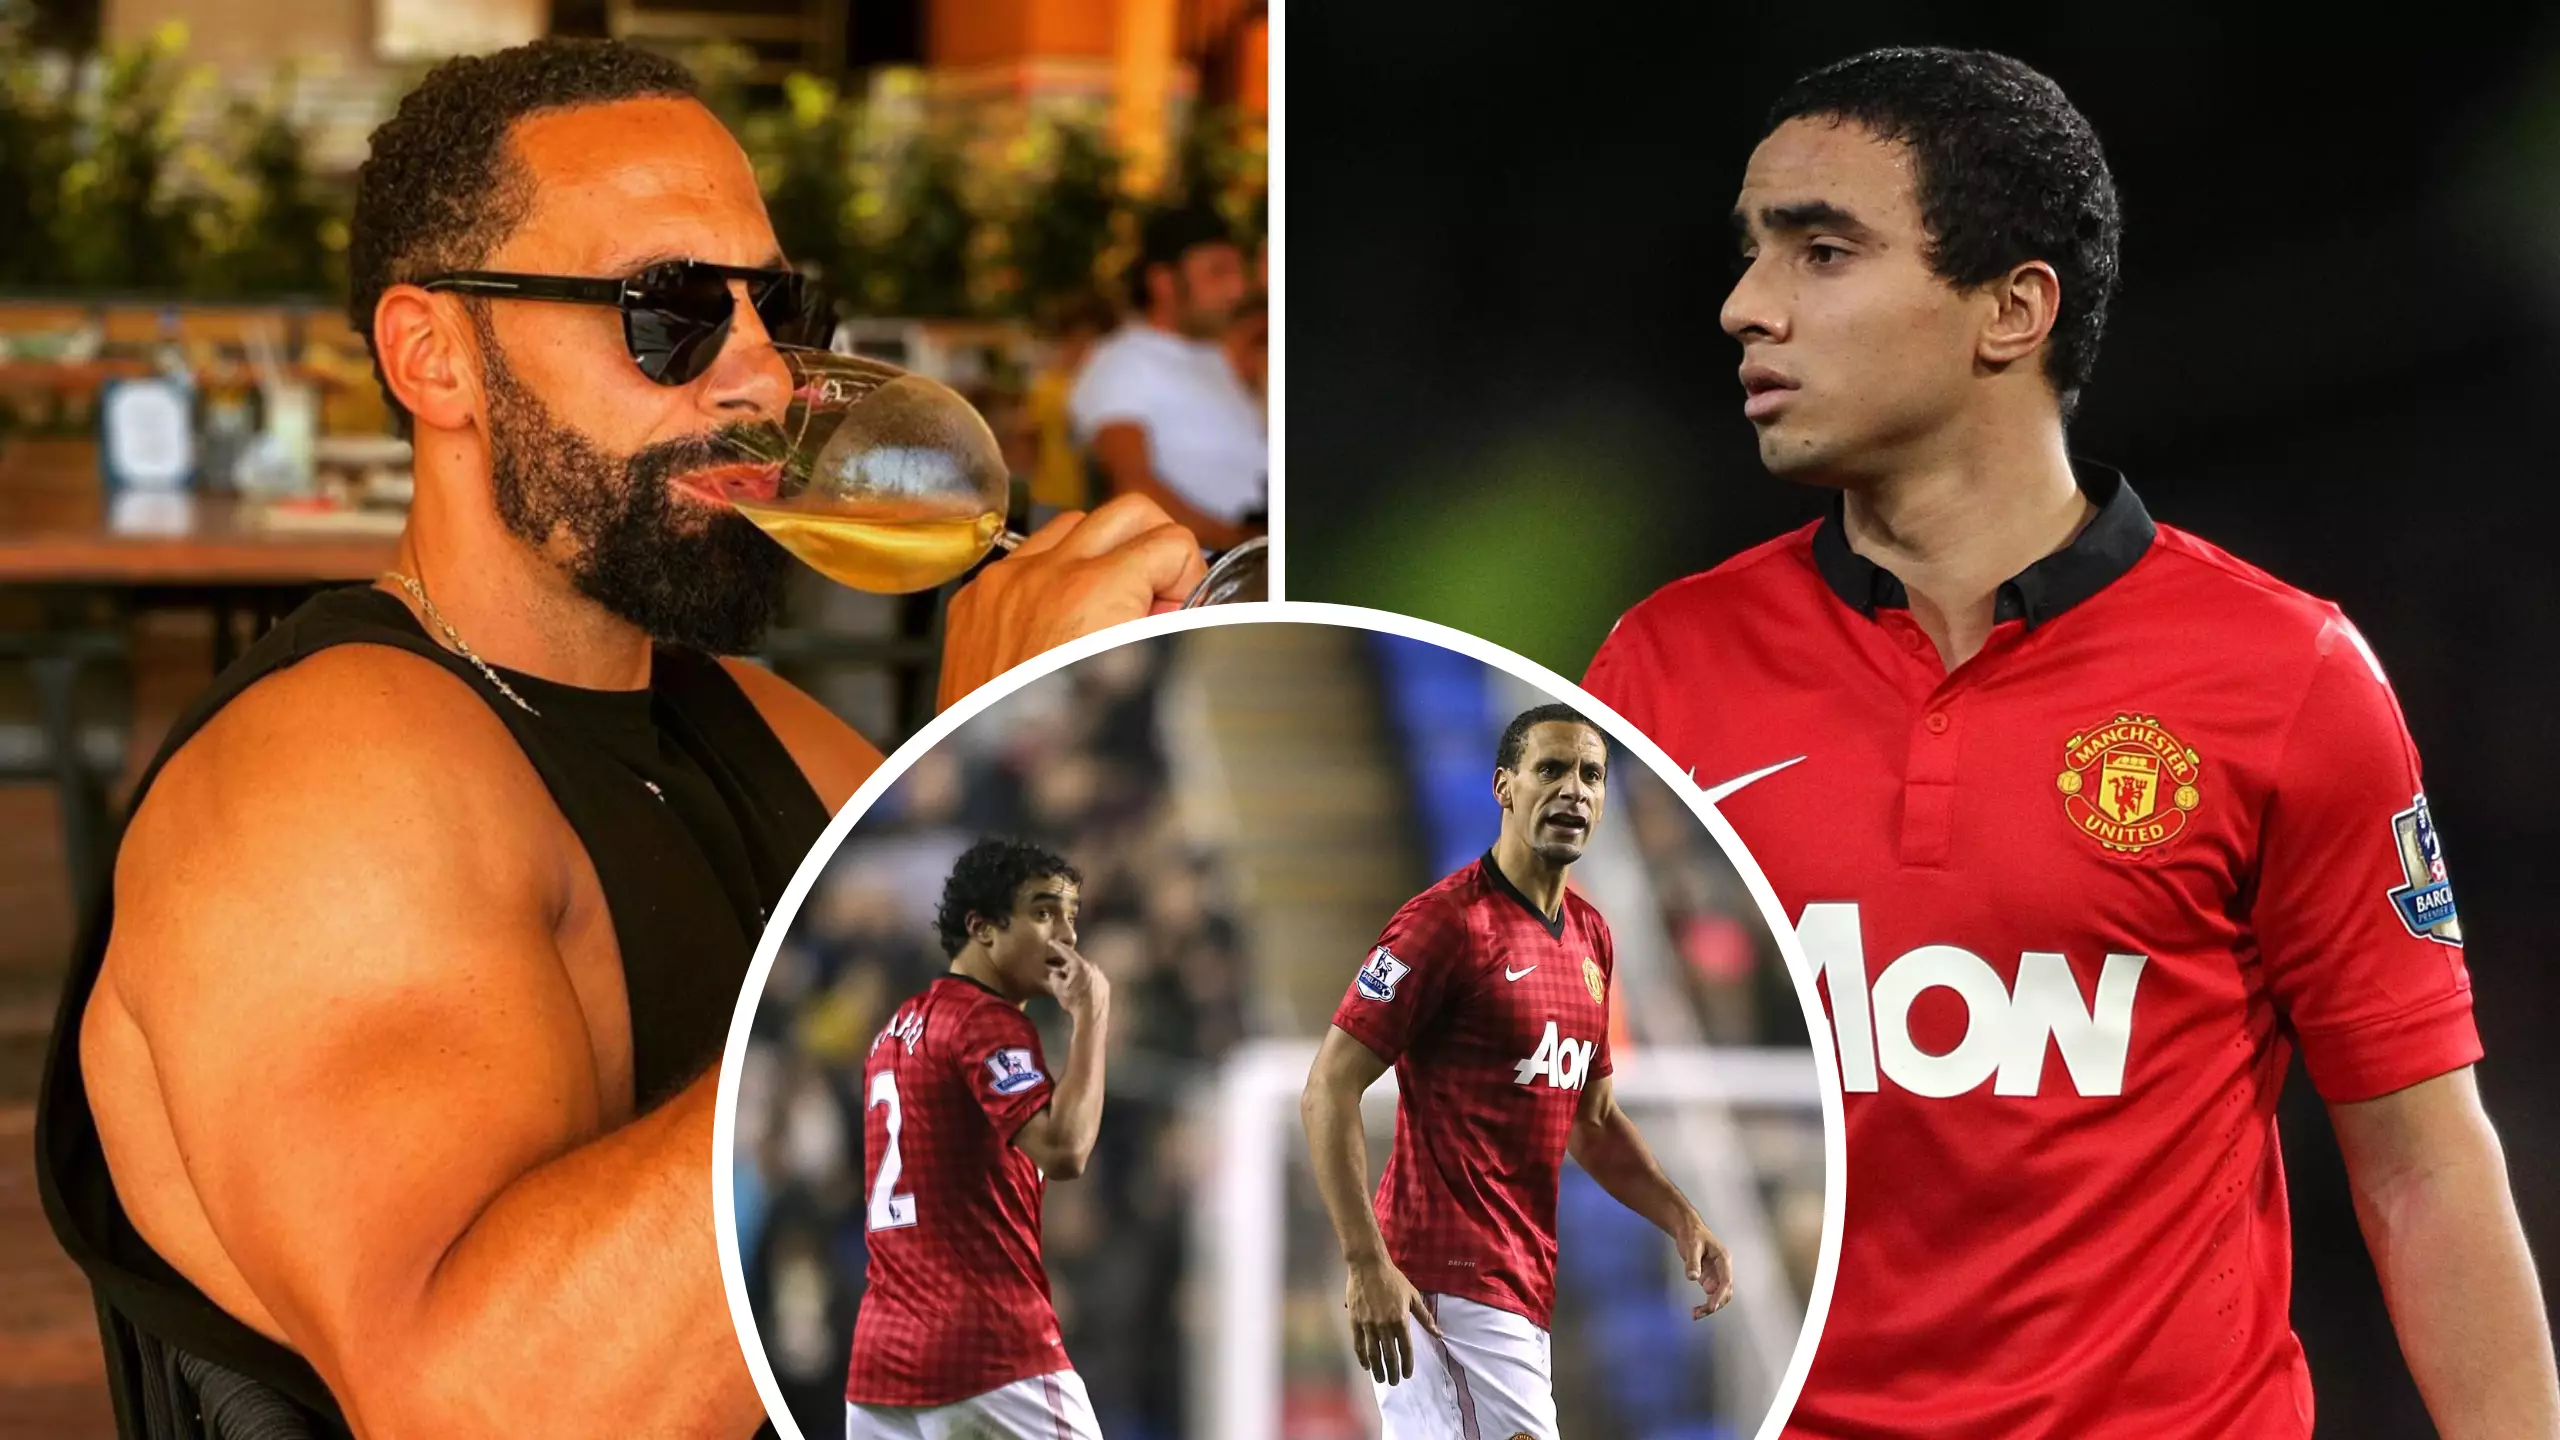 Rio Ferdinand Accused Of Photoshopping Arms By Former Manchester United Teammate